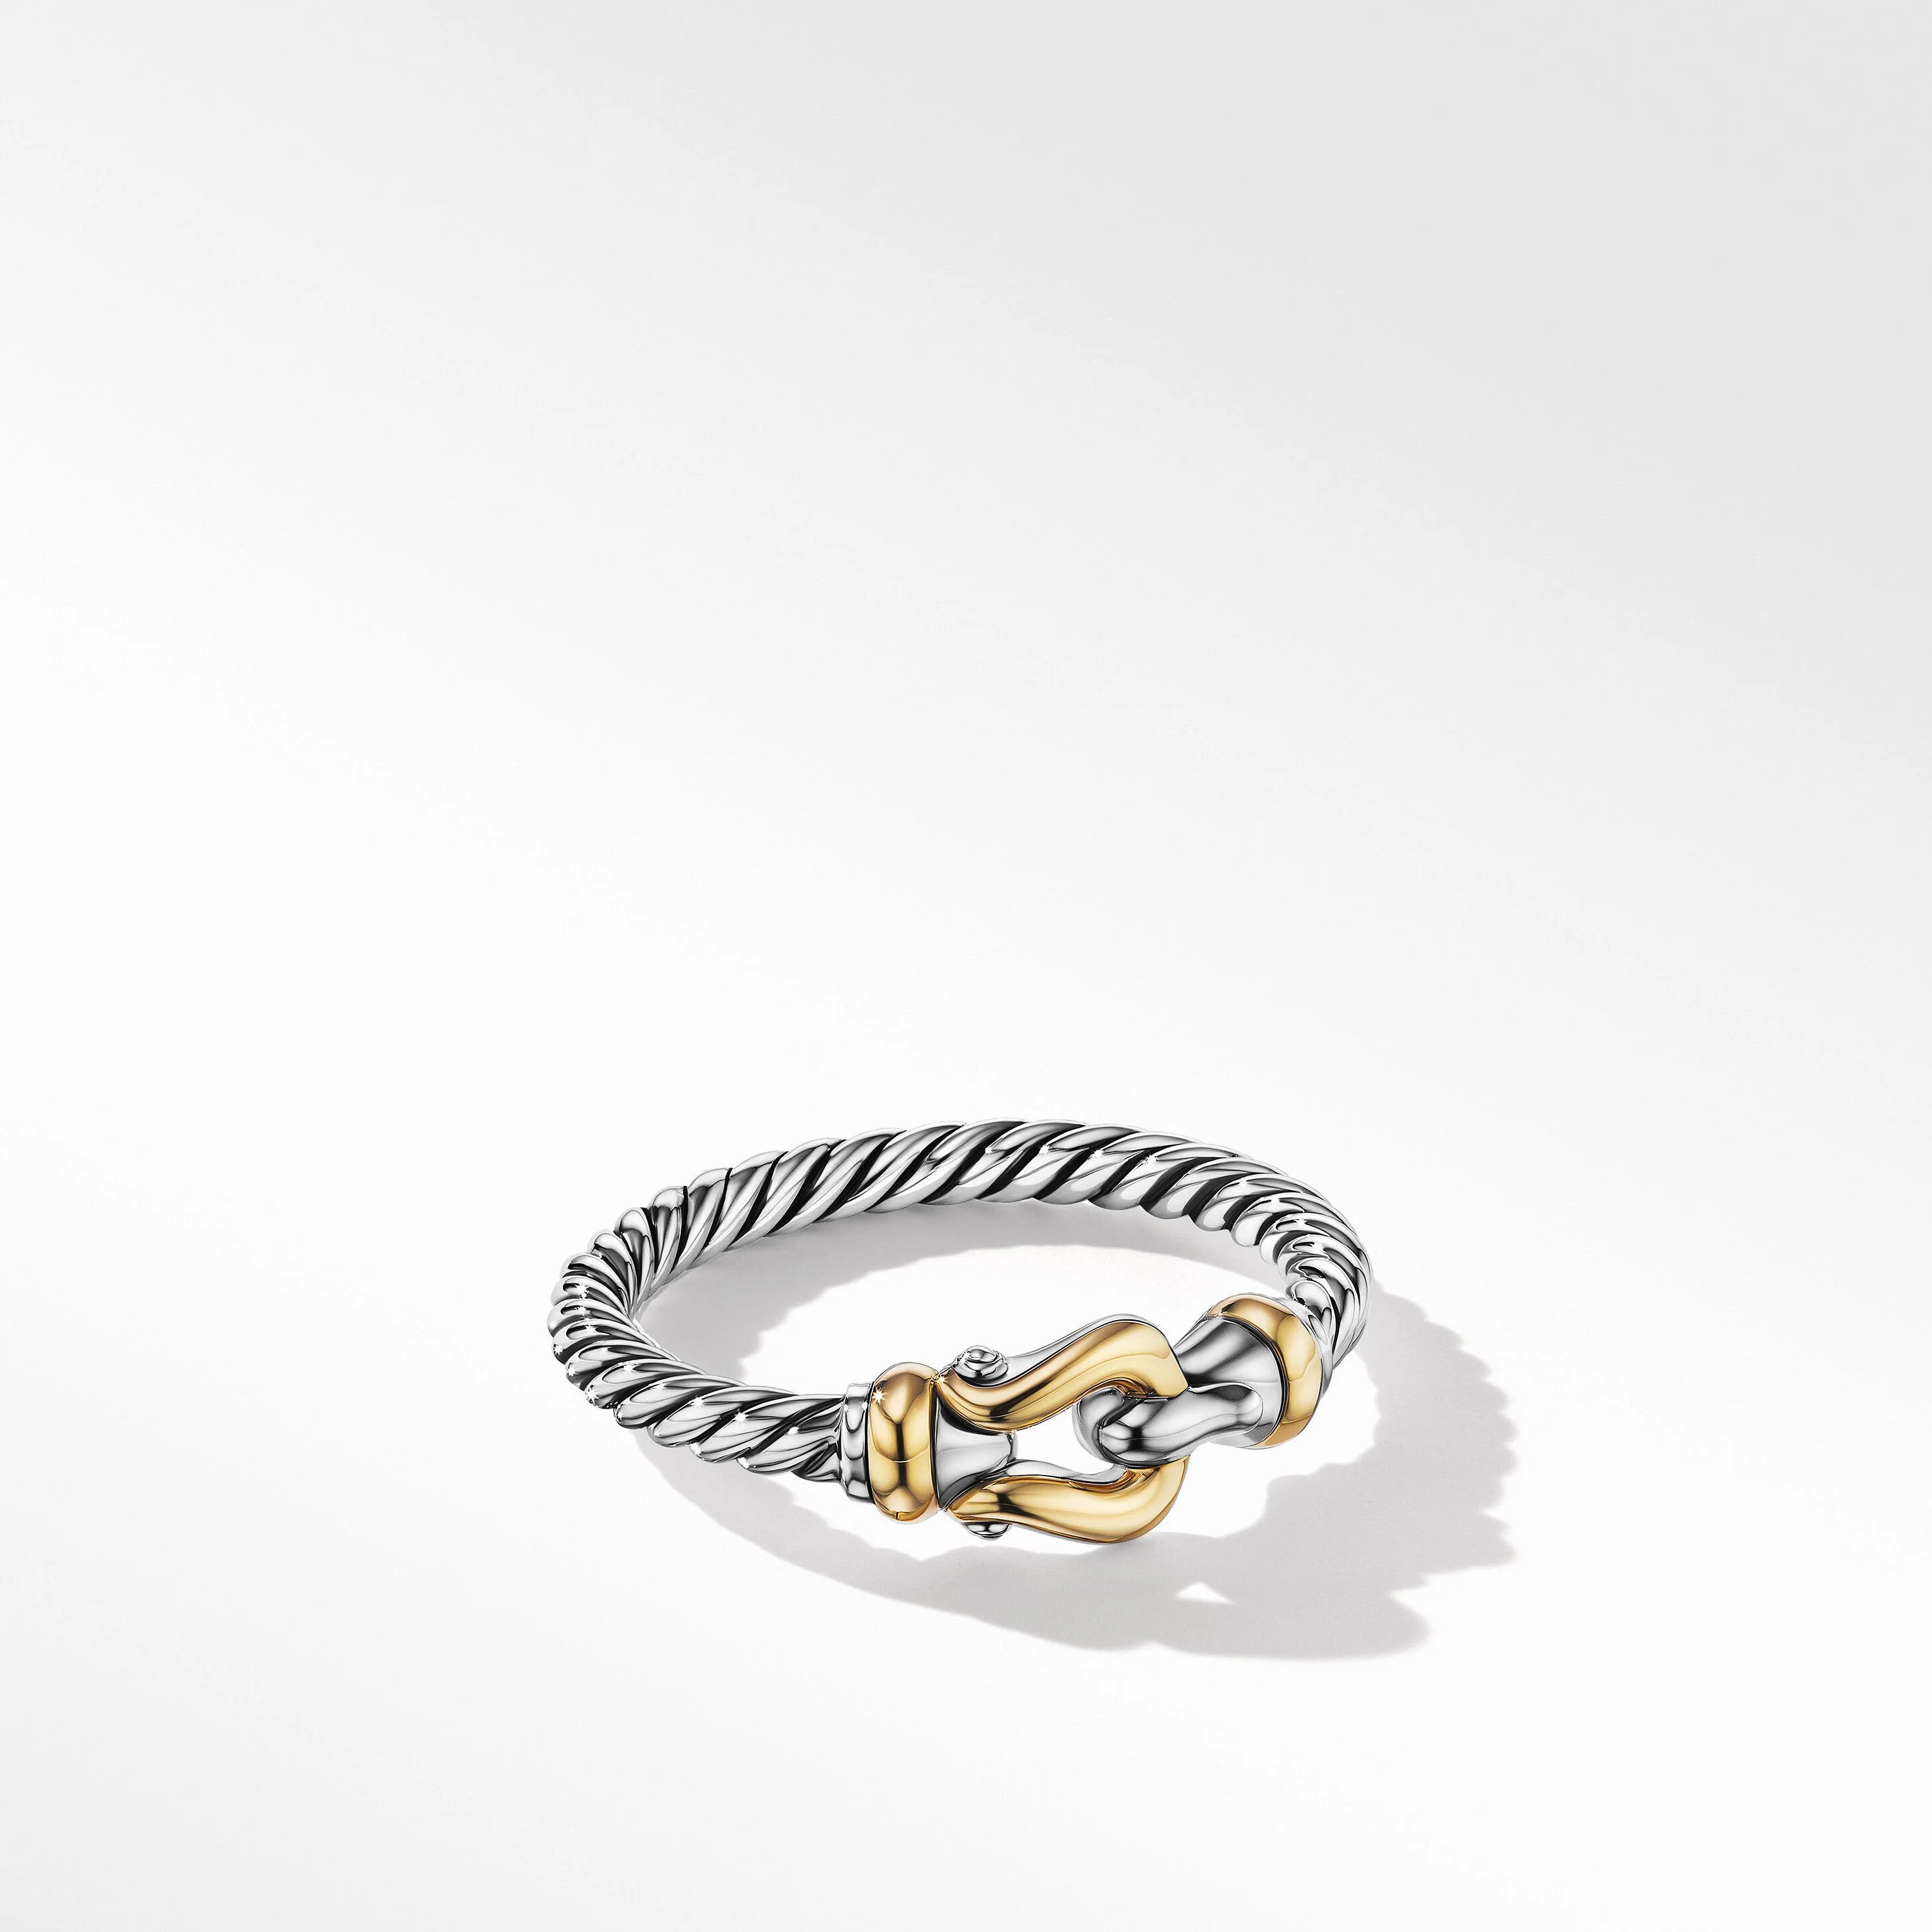 Petite Buckle Ring in Sterling Silver with 18K Yellow Gold | David Yurman